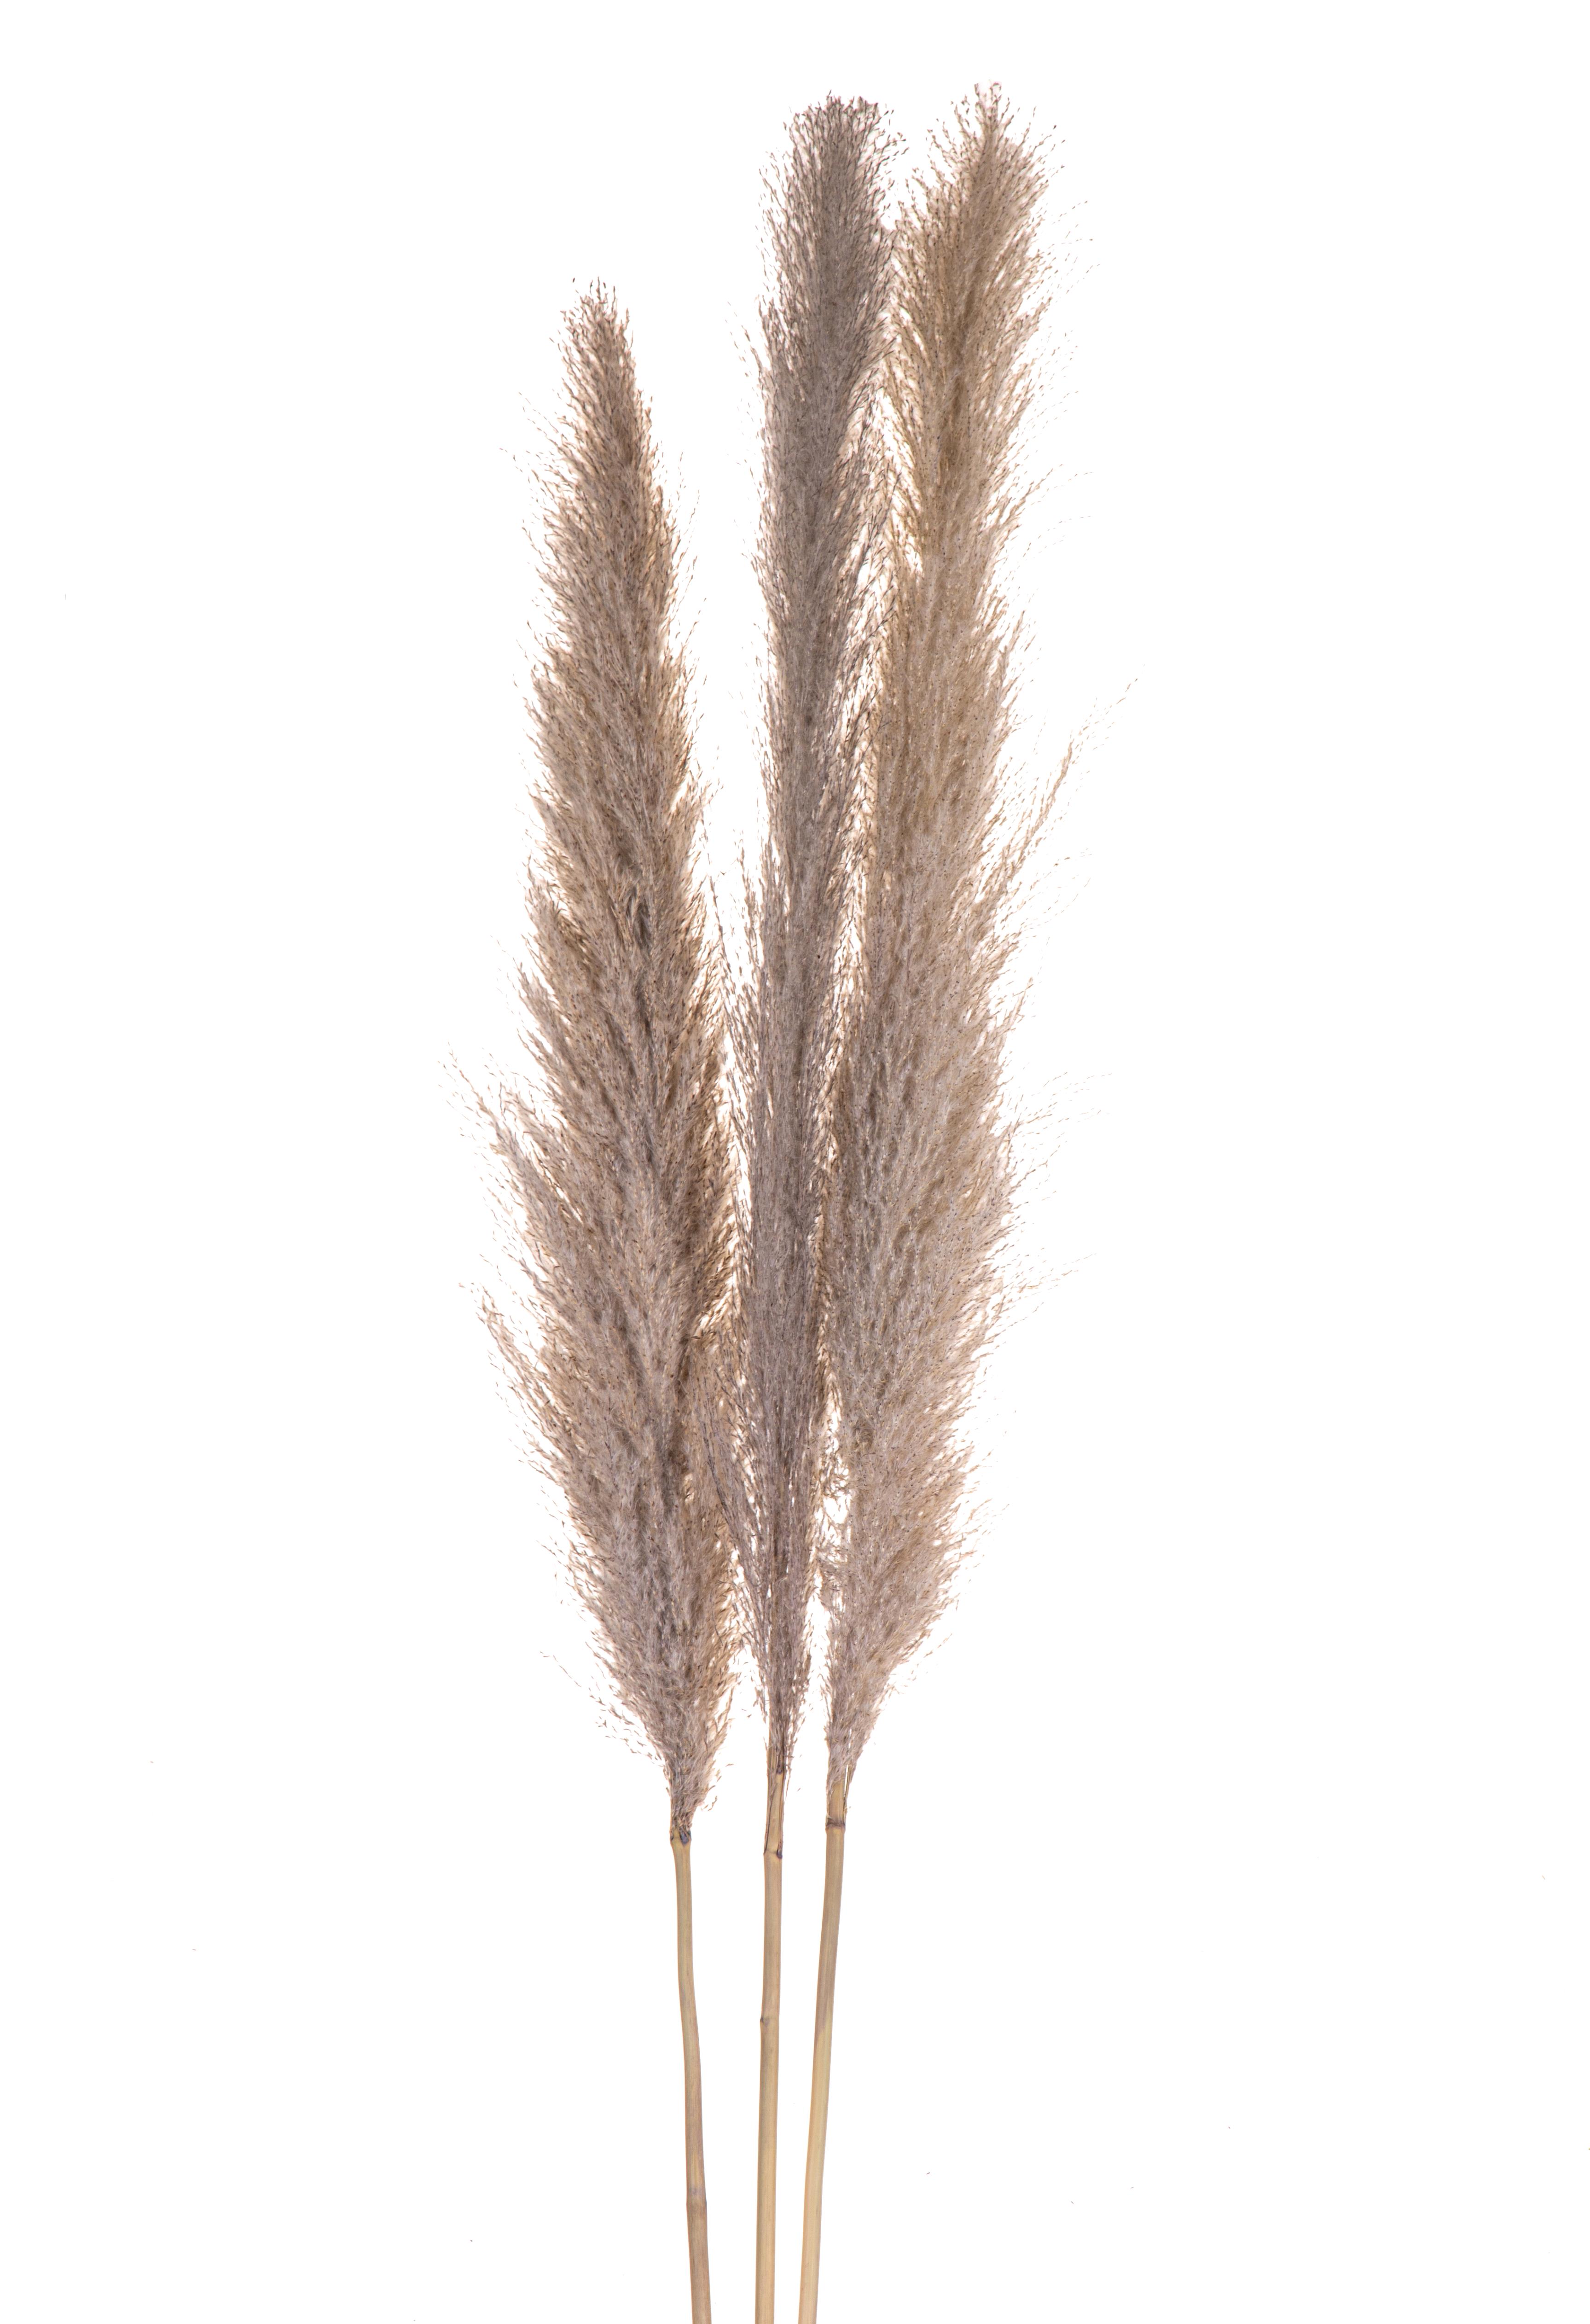 NATURAL PRODUCTS DRIED FLOWERS AND ERBS,PAMPAS-CORTADEIRA SELLONA 1 PZ 170 CM**